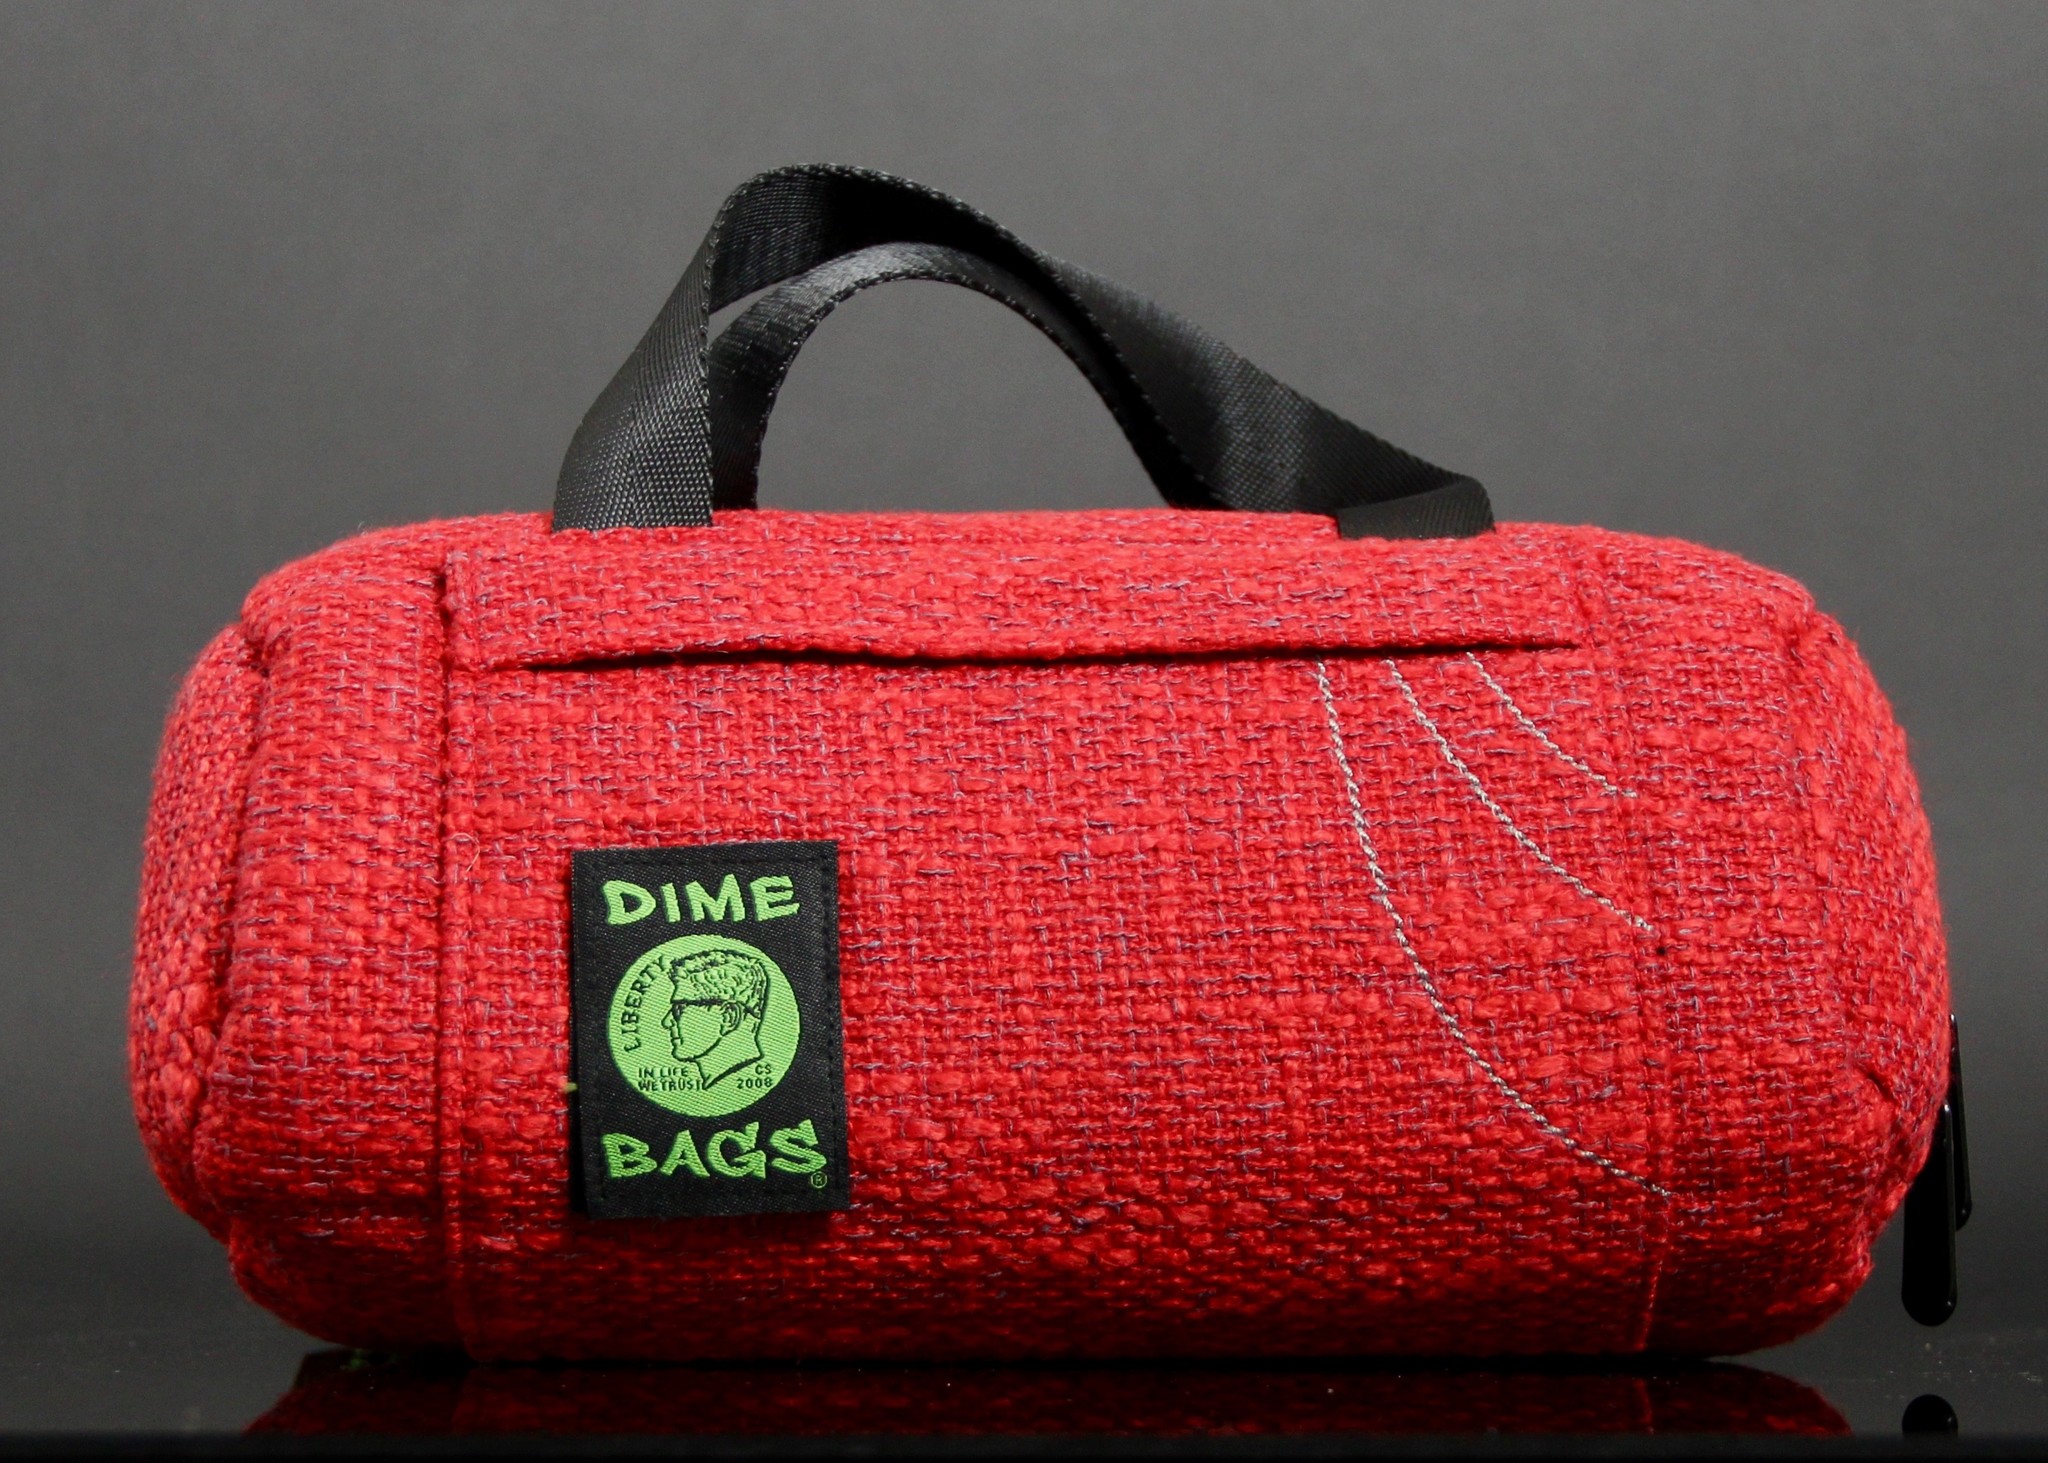 Dime Bags All-in-One Padded Pouch 10